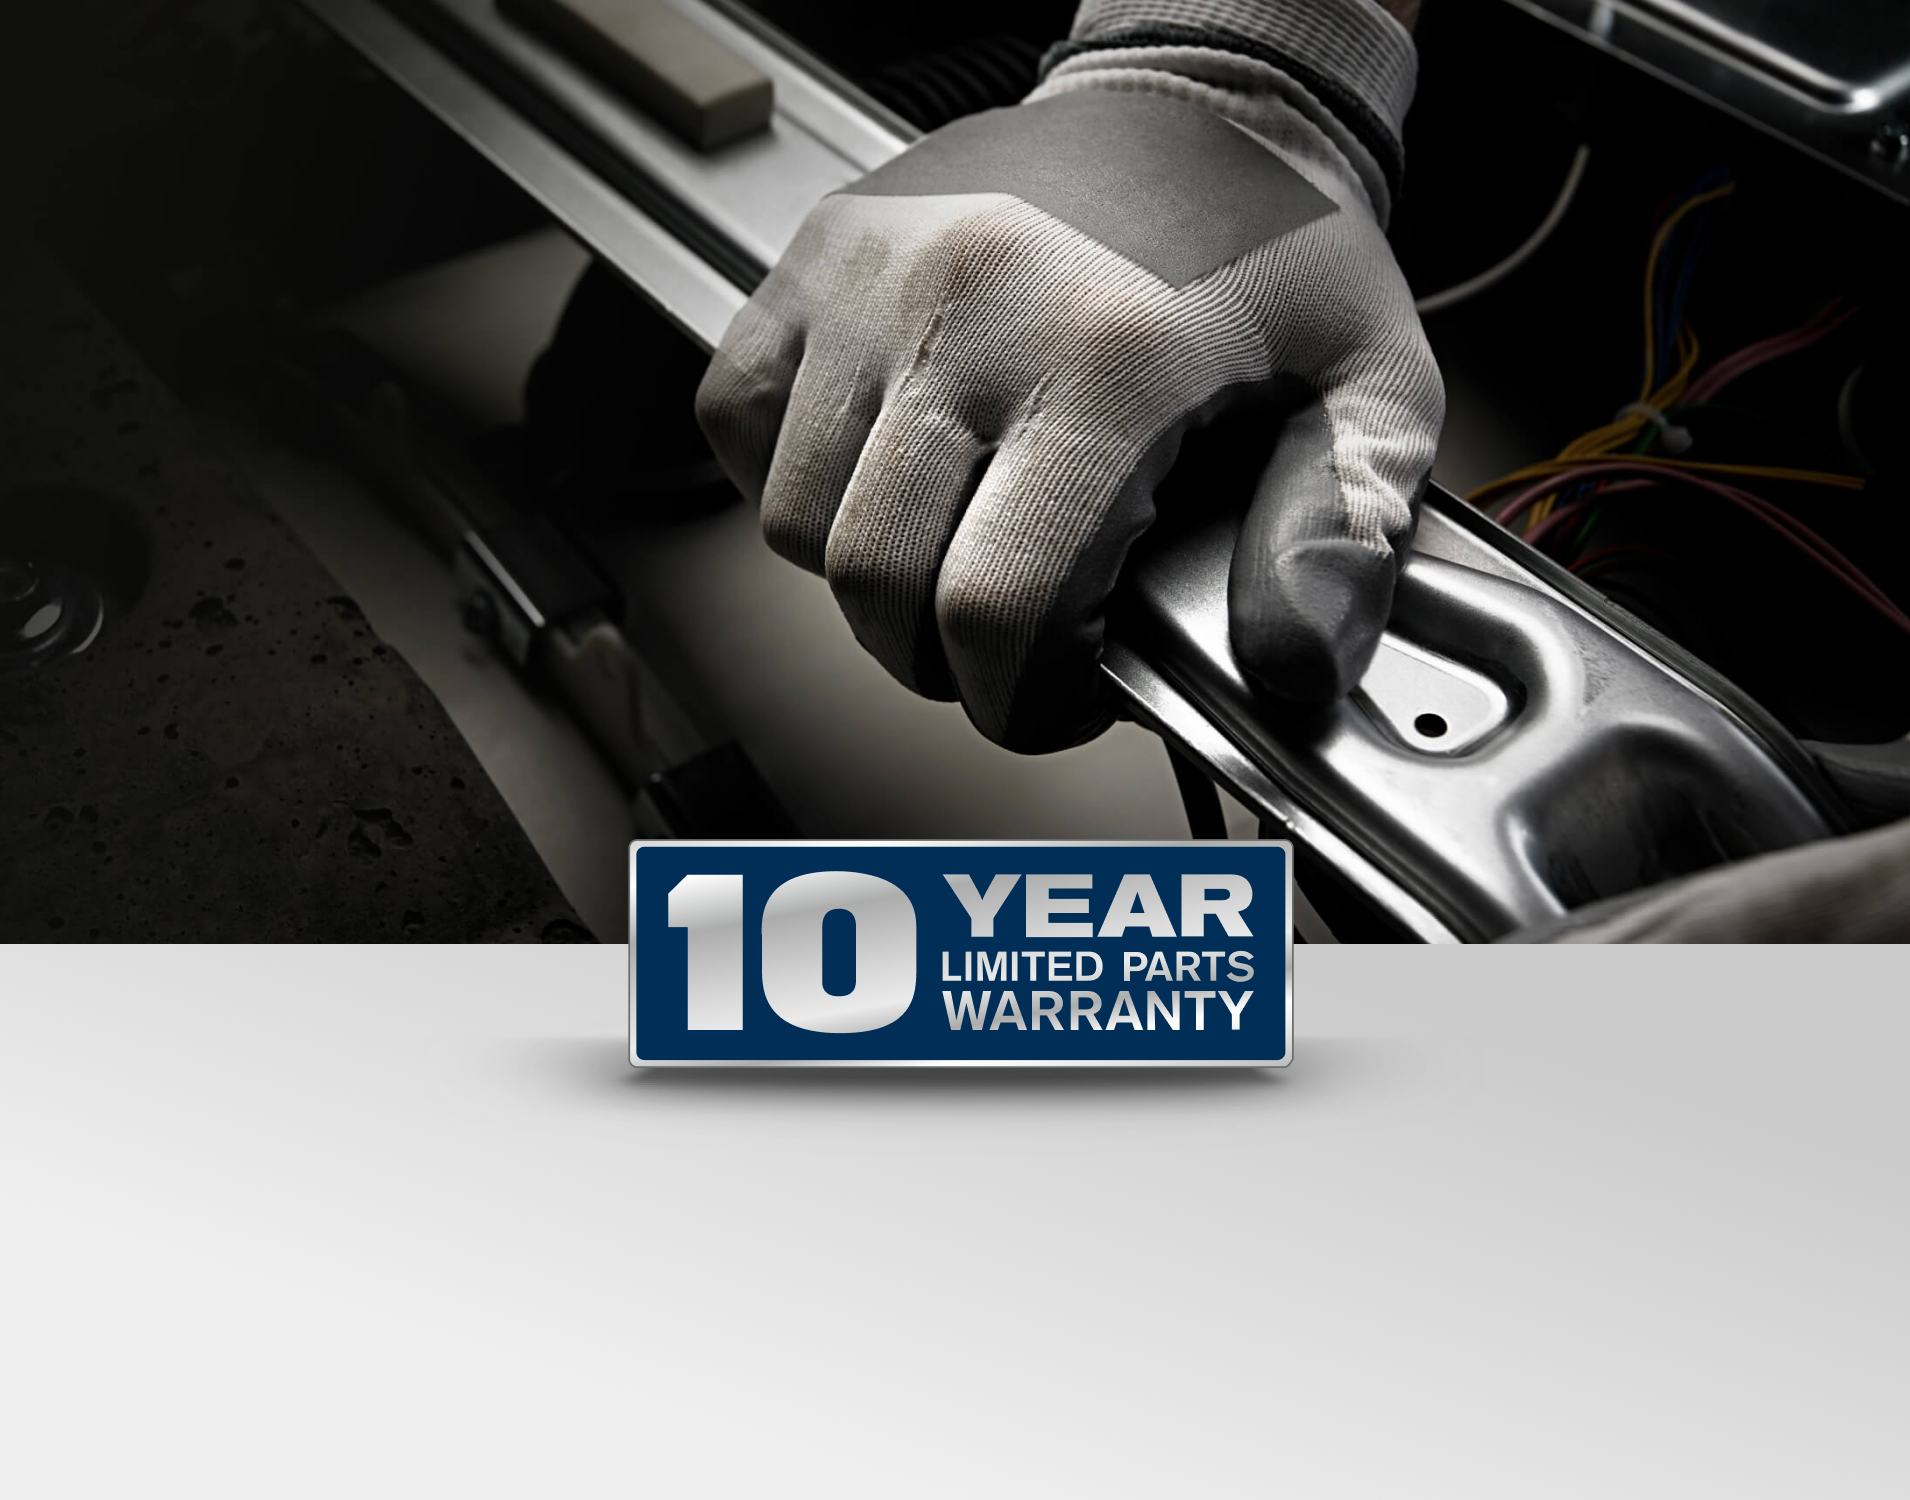 10-Year limited parts warranty.